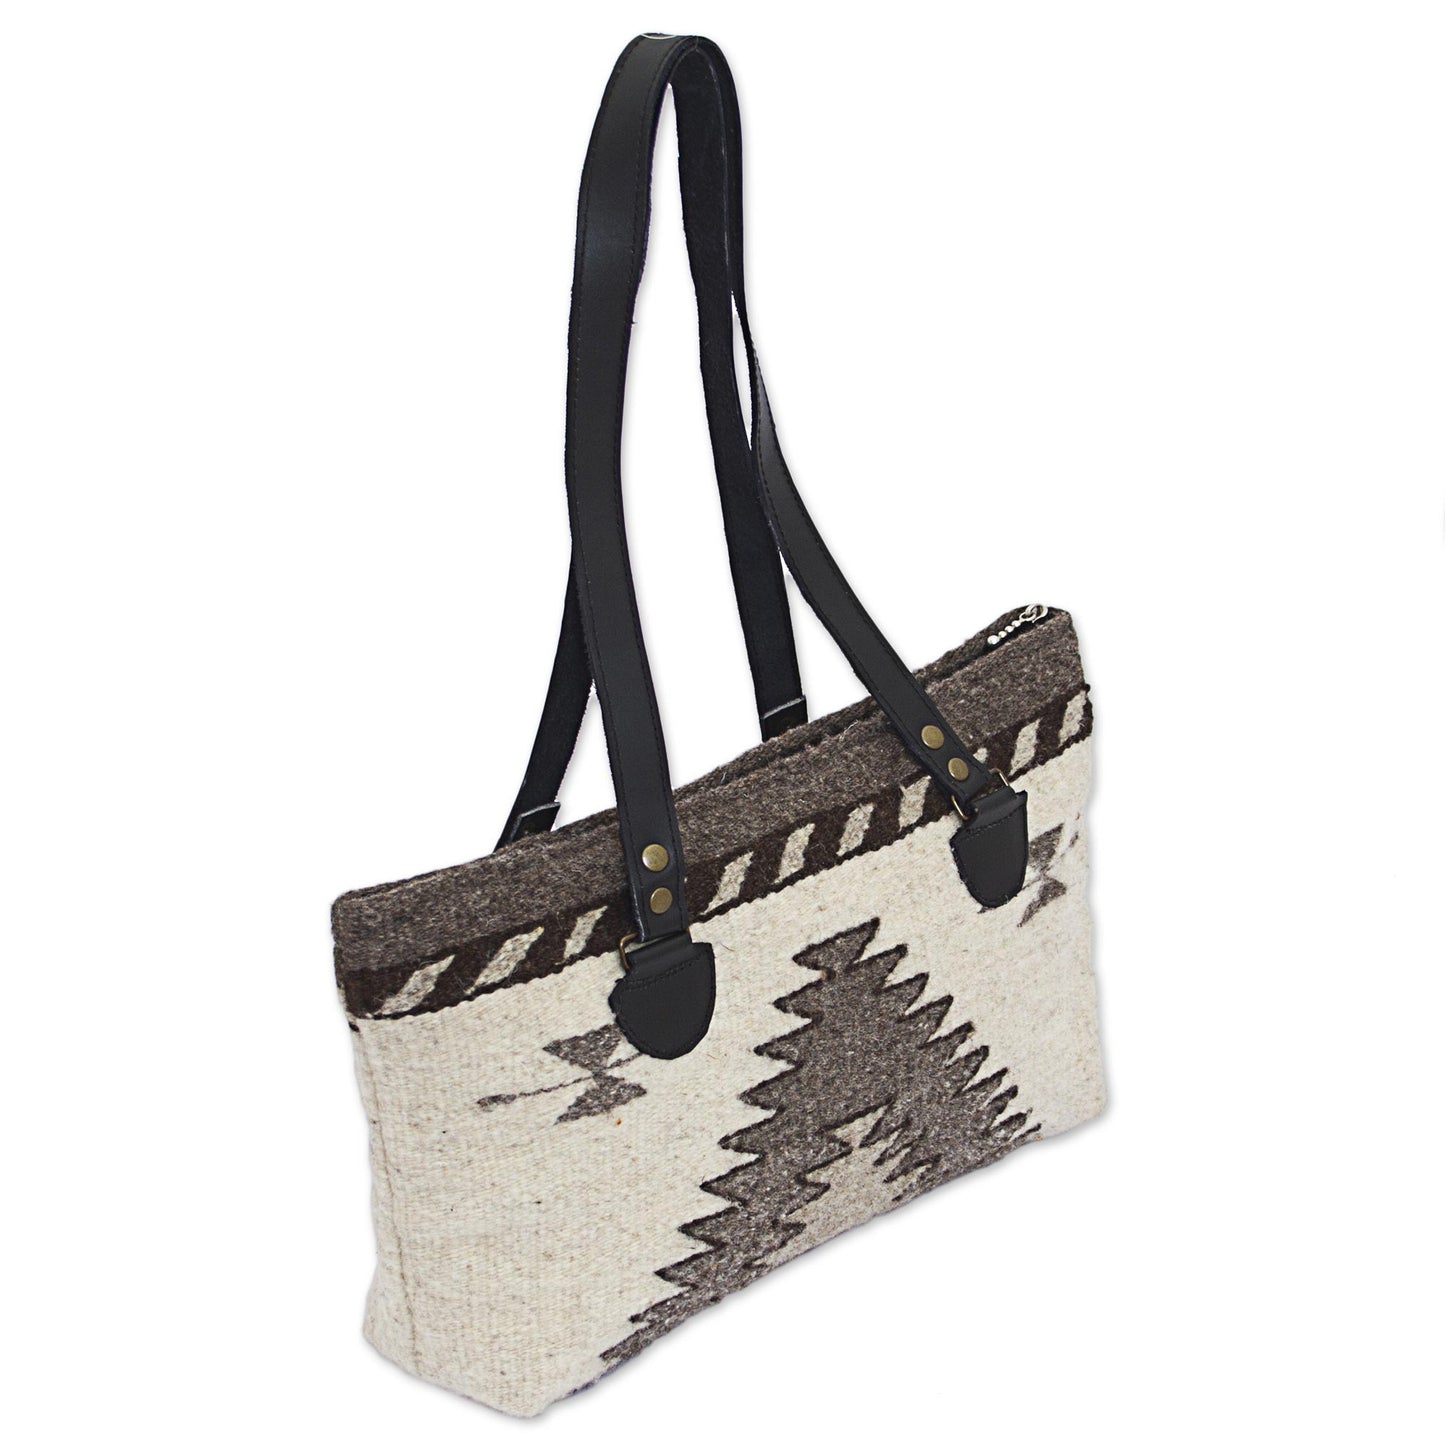 'Natural Gems' in Antique White Hand Made Wool Tote Handbag